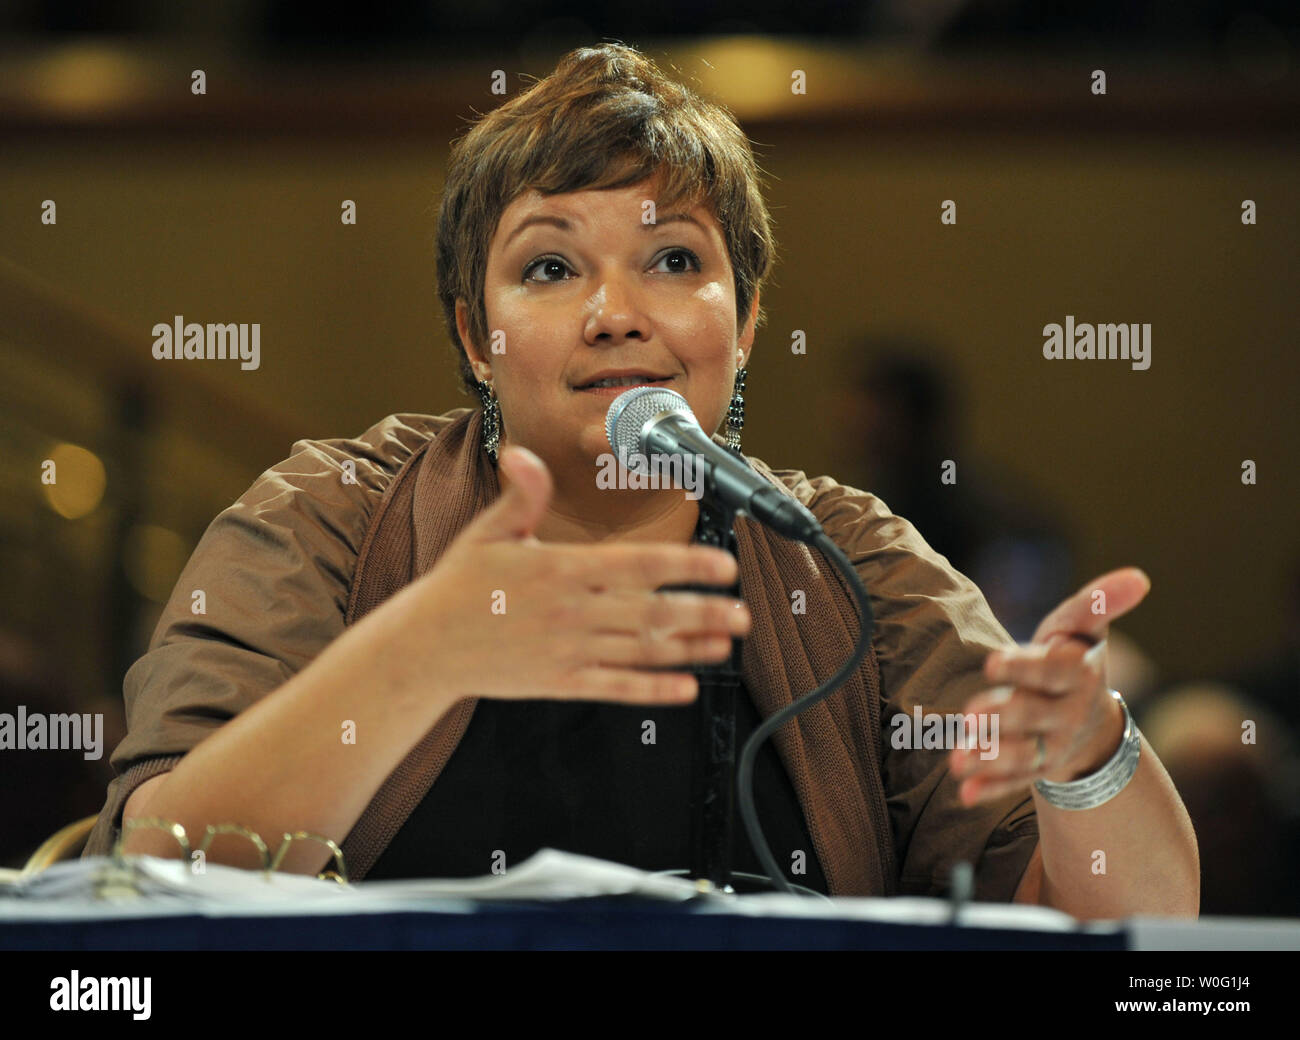 EPA Administrator Lisa Jackson participates in a panel discussion on the use of dispersants during a public hearing on the response to the BP Deepwater Horizon oil spill, in Washington on September, 27, 2010.   UPI/Kevin Dietsch Stock Photo